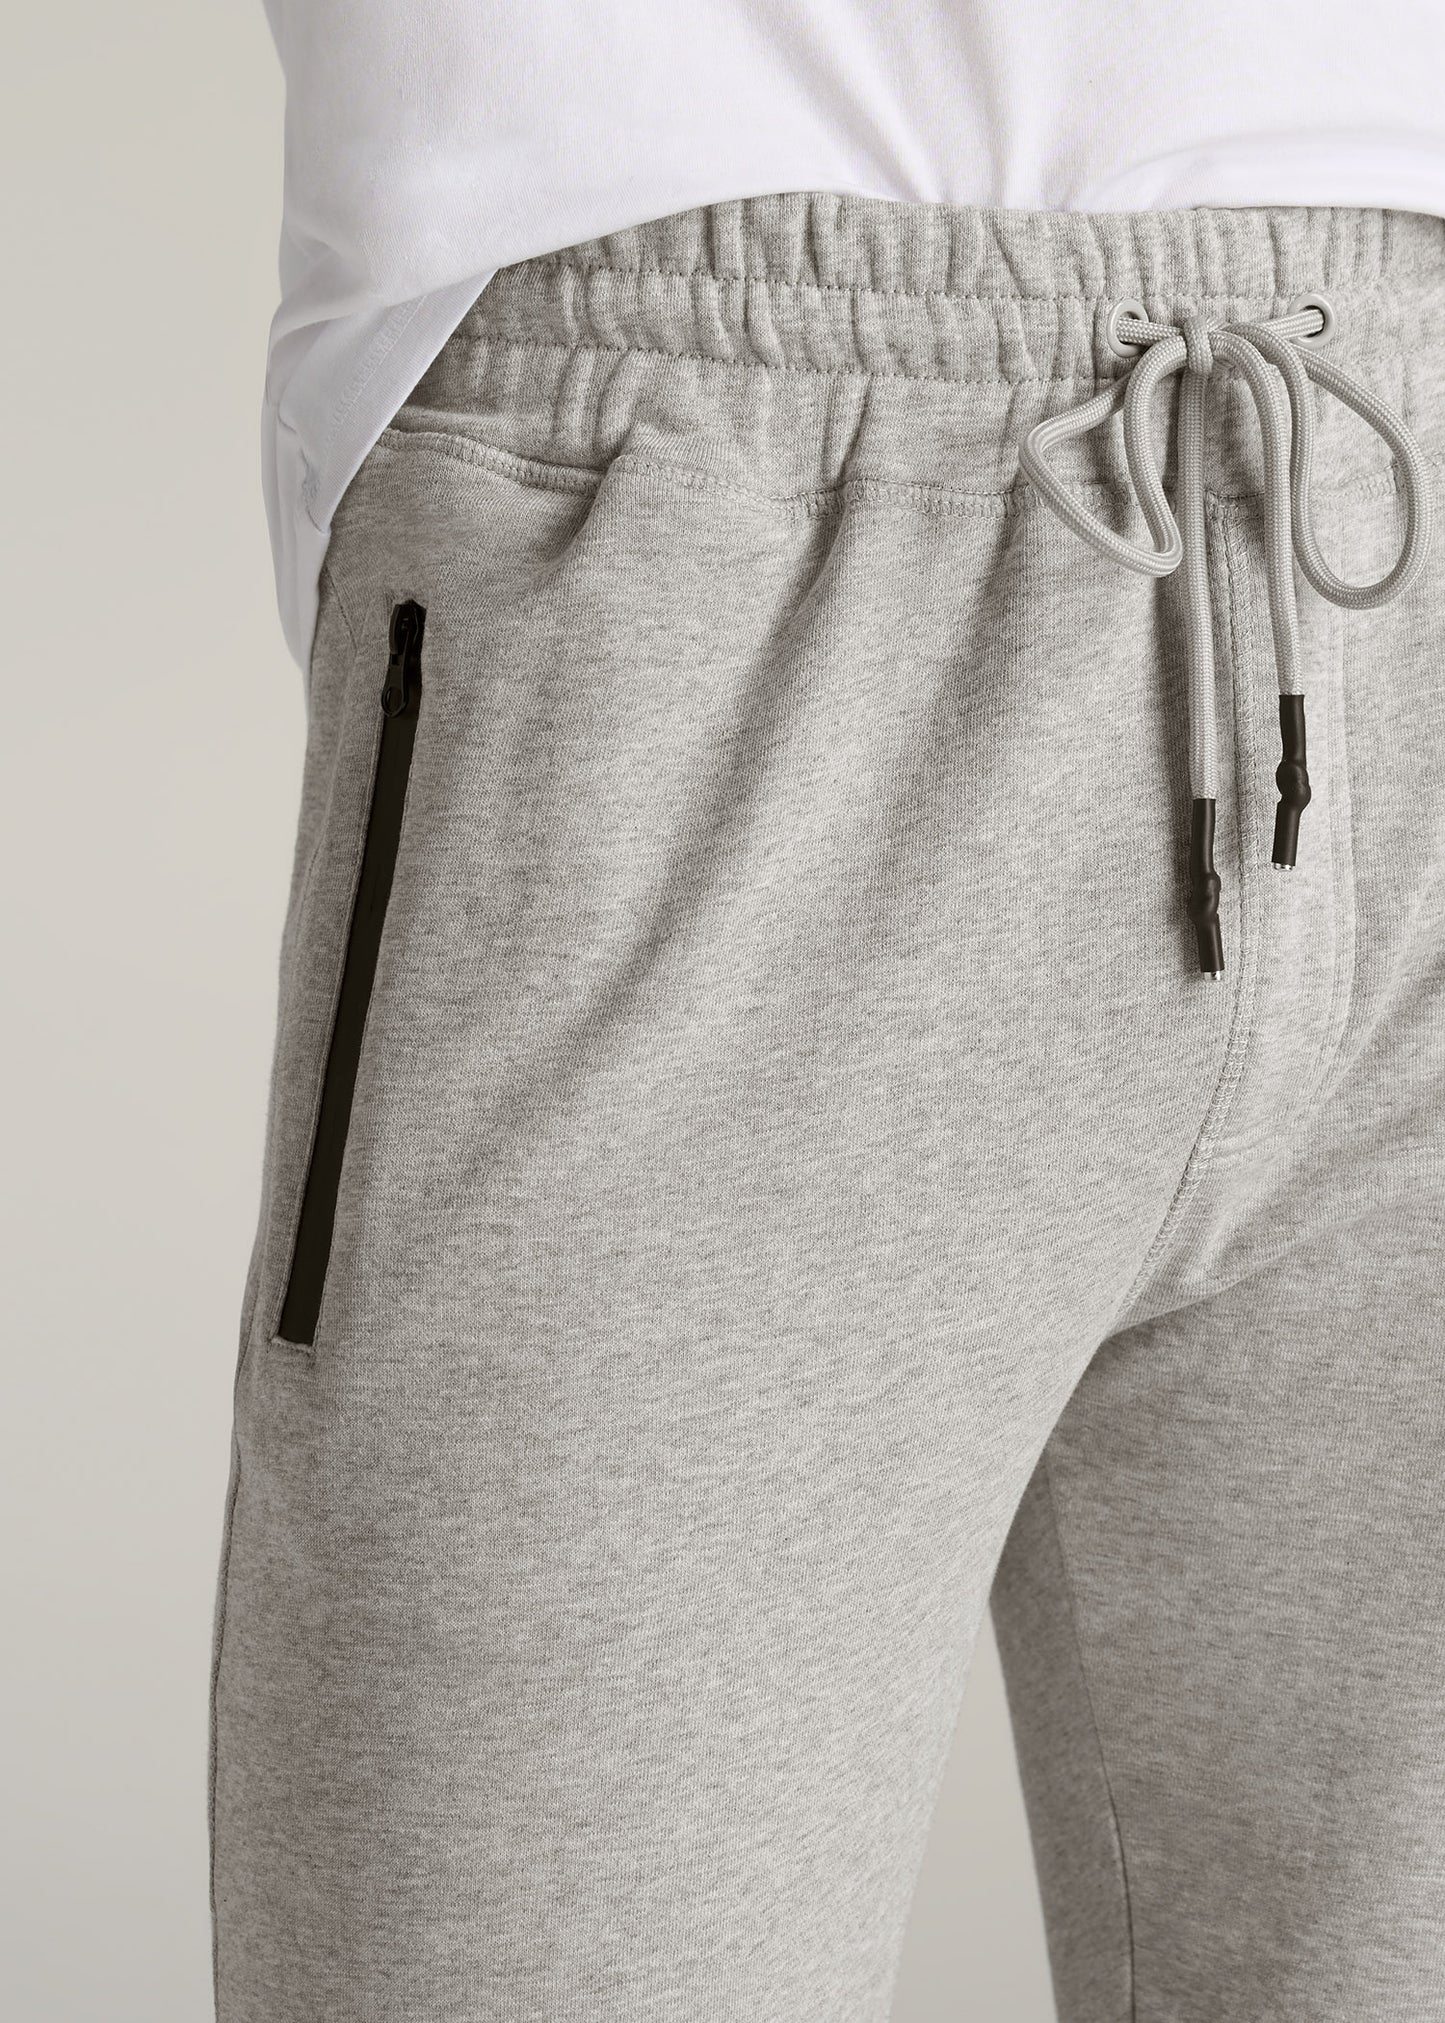     American-Tall-Men-French-Terry-Mens-Joggers-Grey-Mix-detail